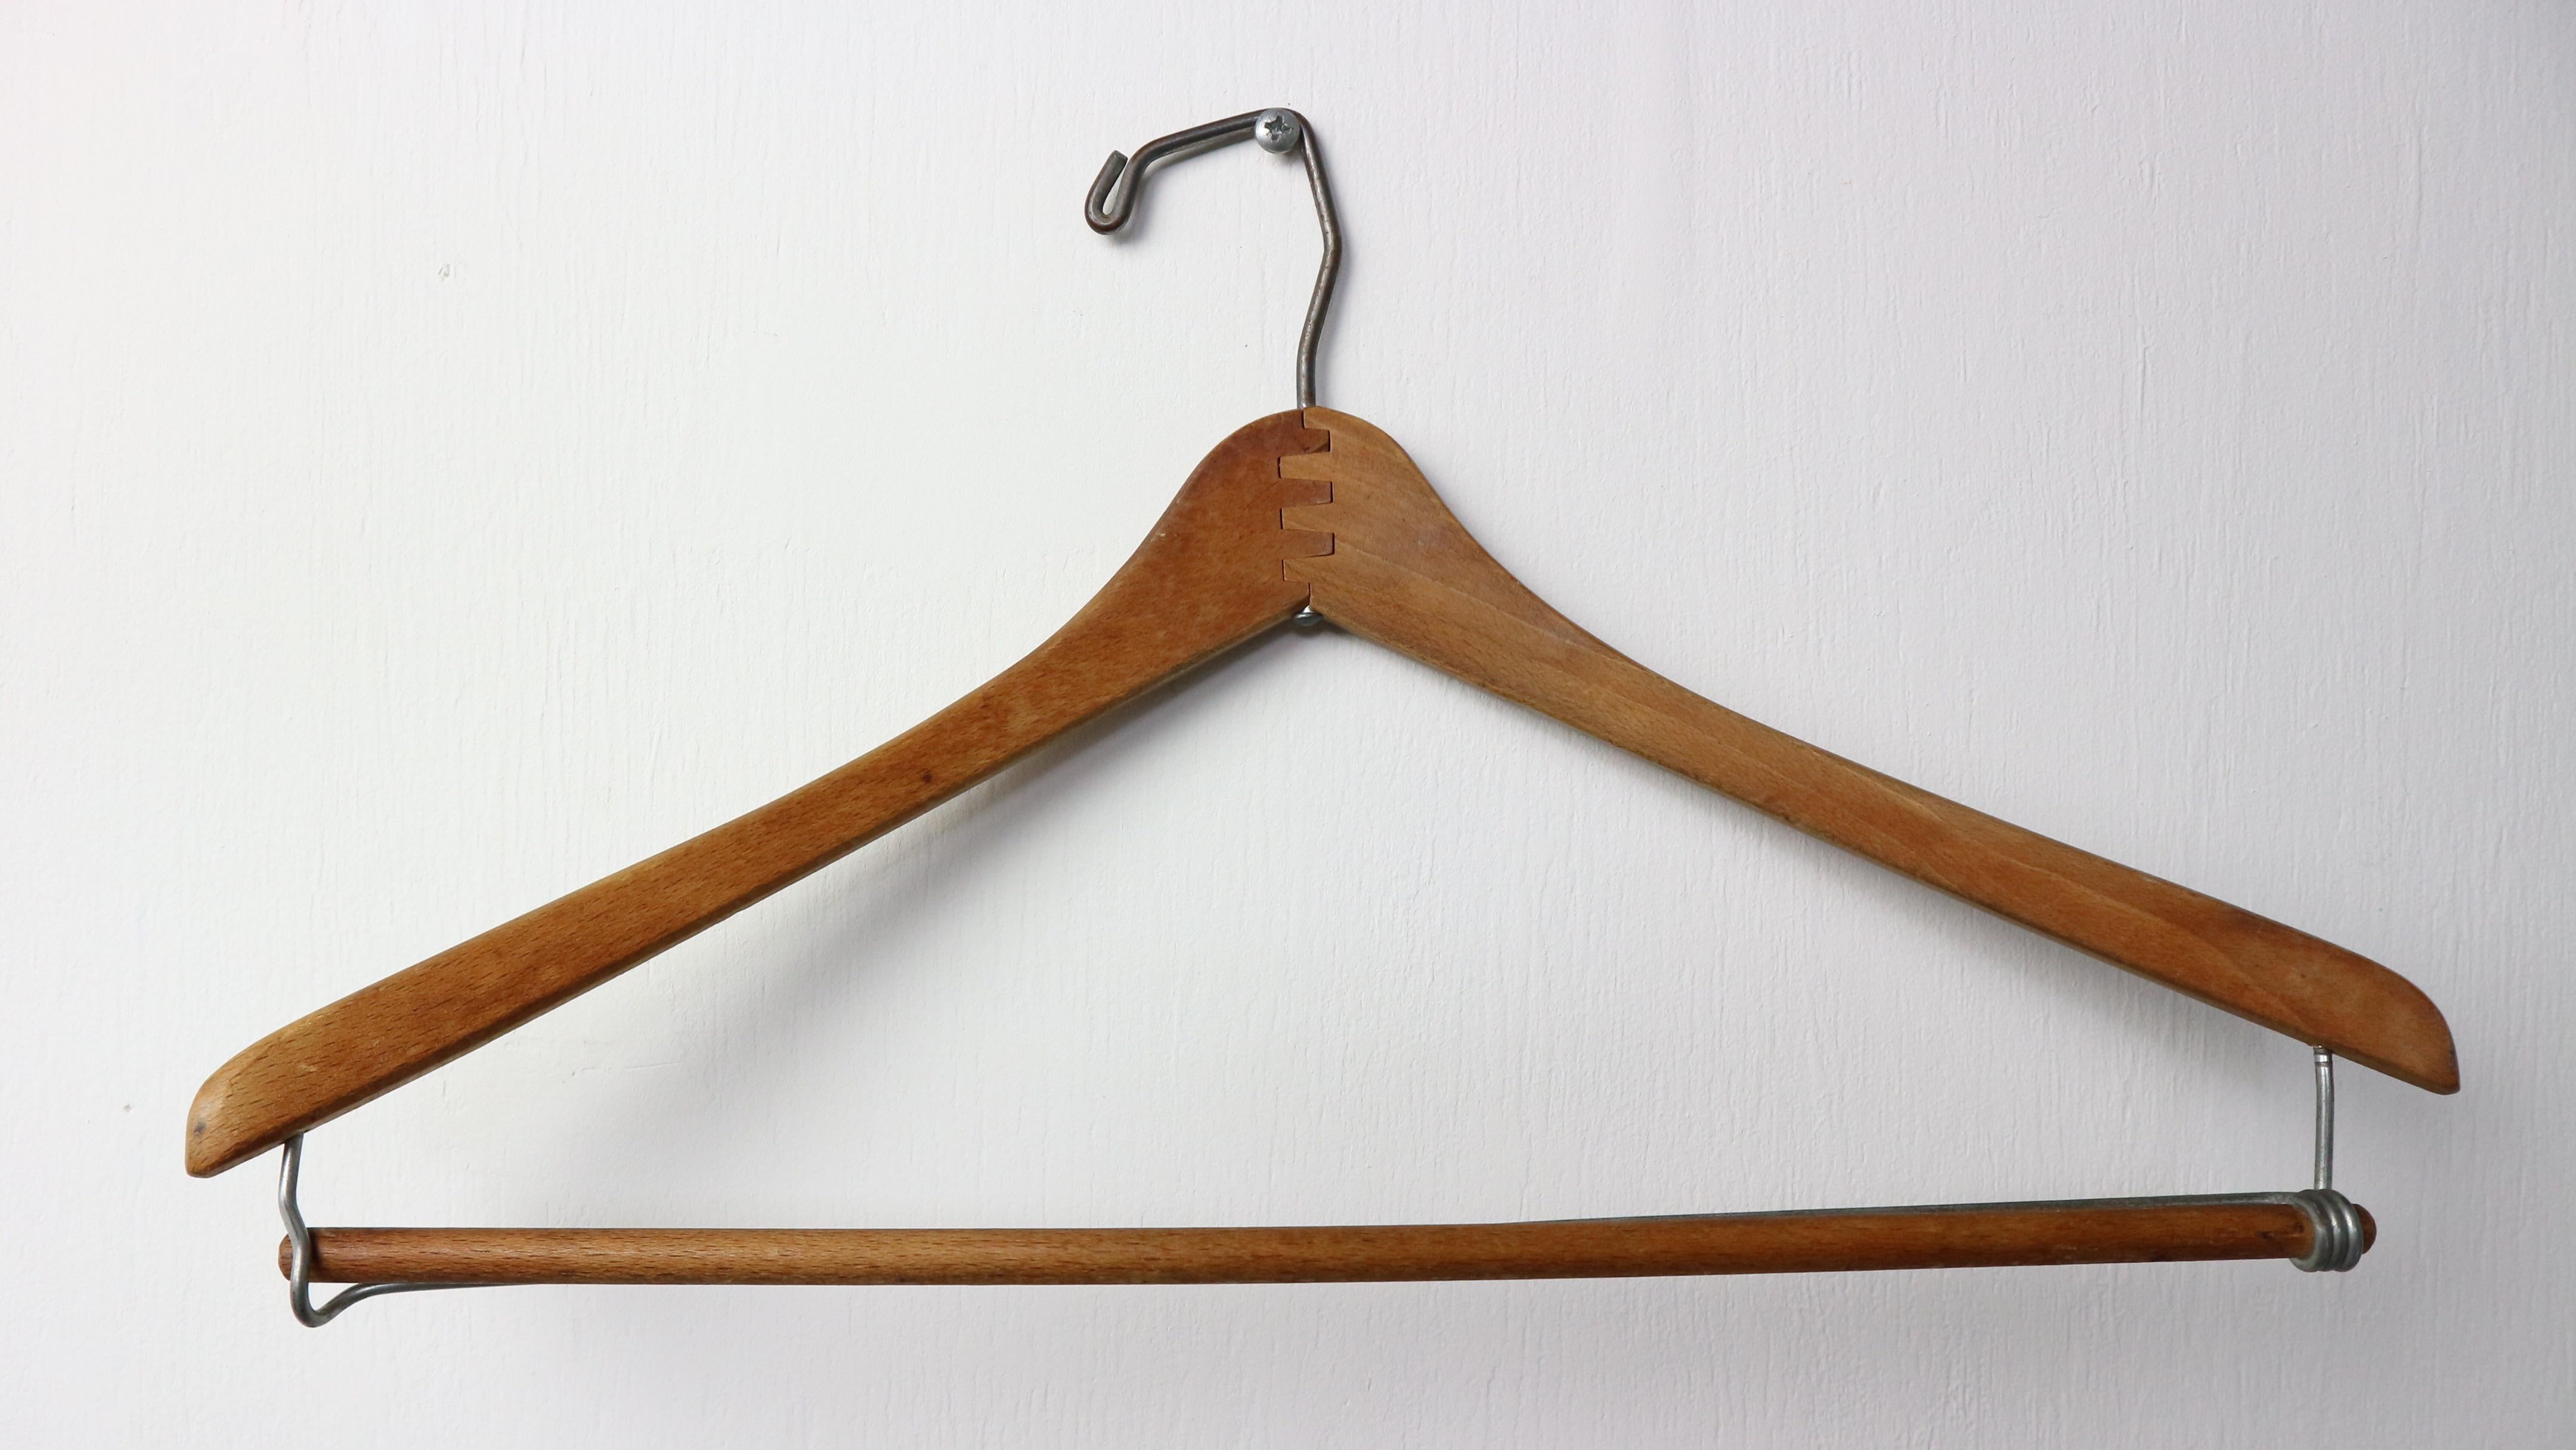 It is an old hanger, made of wood reinforced with wire and still very robust. Beautiful curved suit hanger with metal hook and locking pants bar.
But can also be used very decorative to hang posters, cards or pictures.

The hanger is handmade